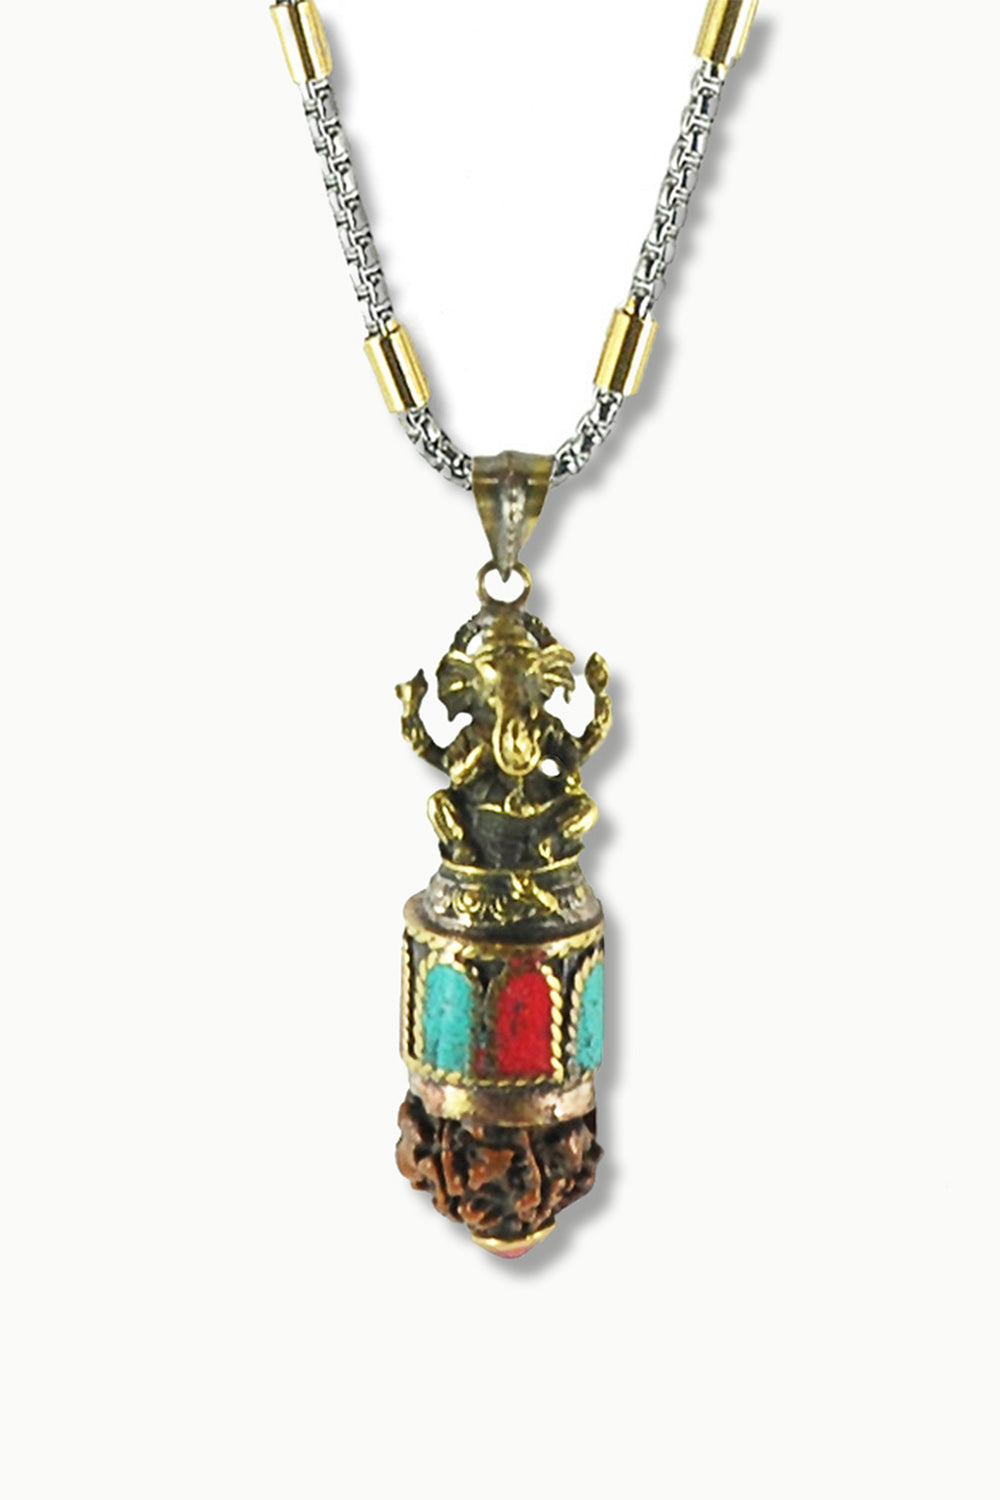 Sivalya Ganesha Prosperity and Success Necklace for Men